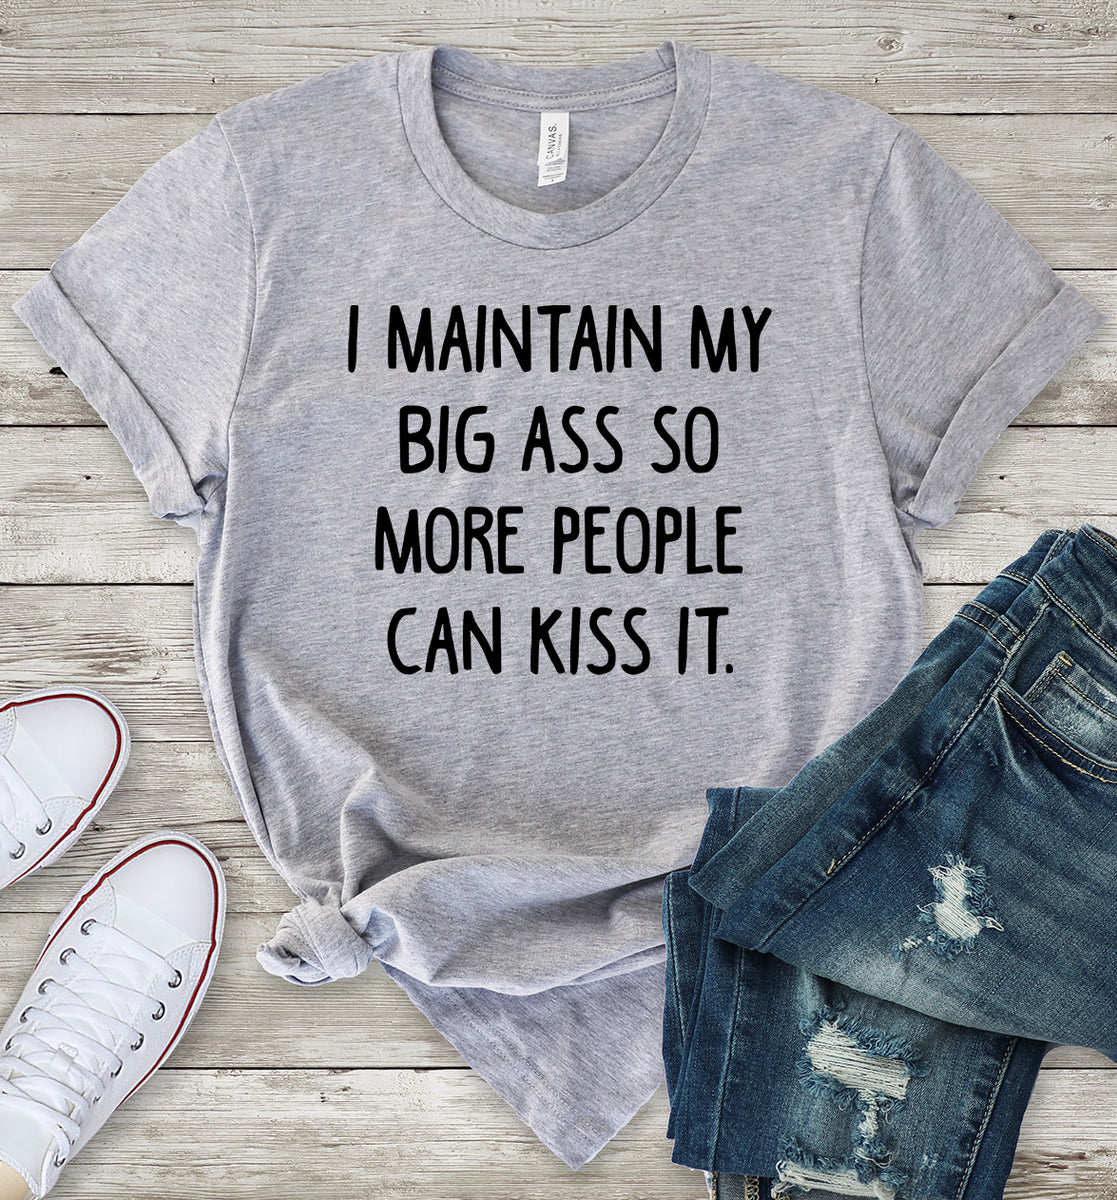 I Maintain My Big Ass So More People Can Kiss It Light Grey T-Shirt